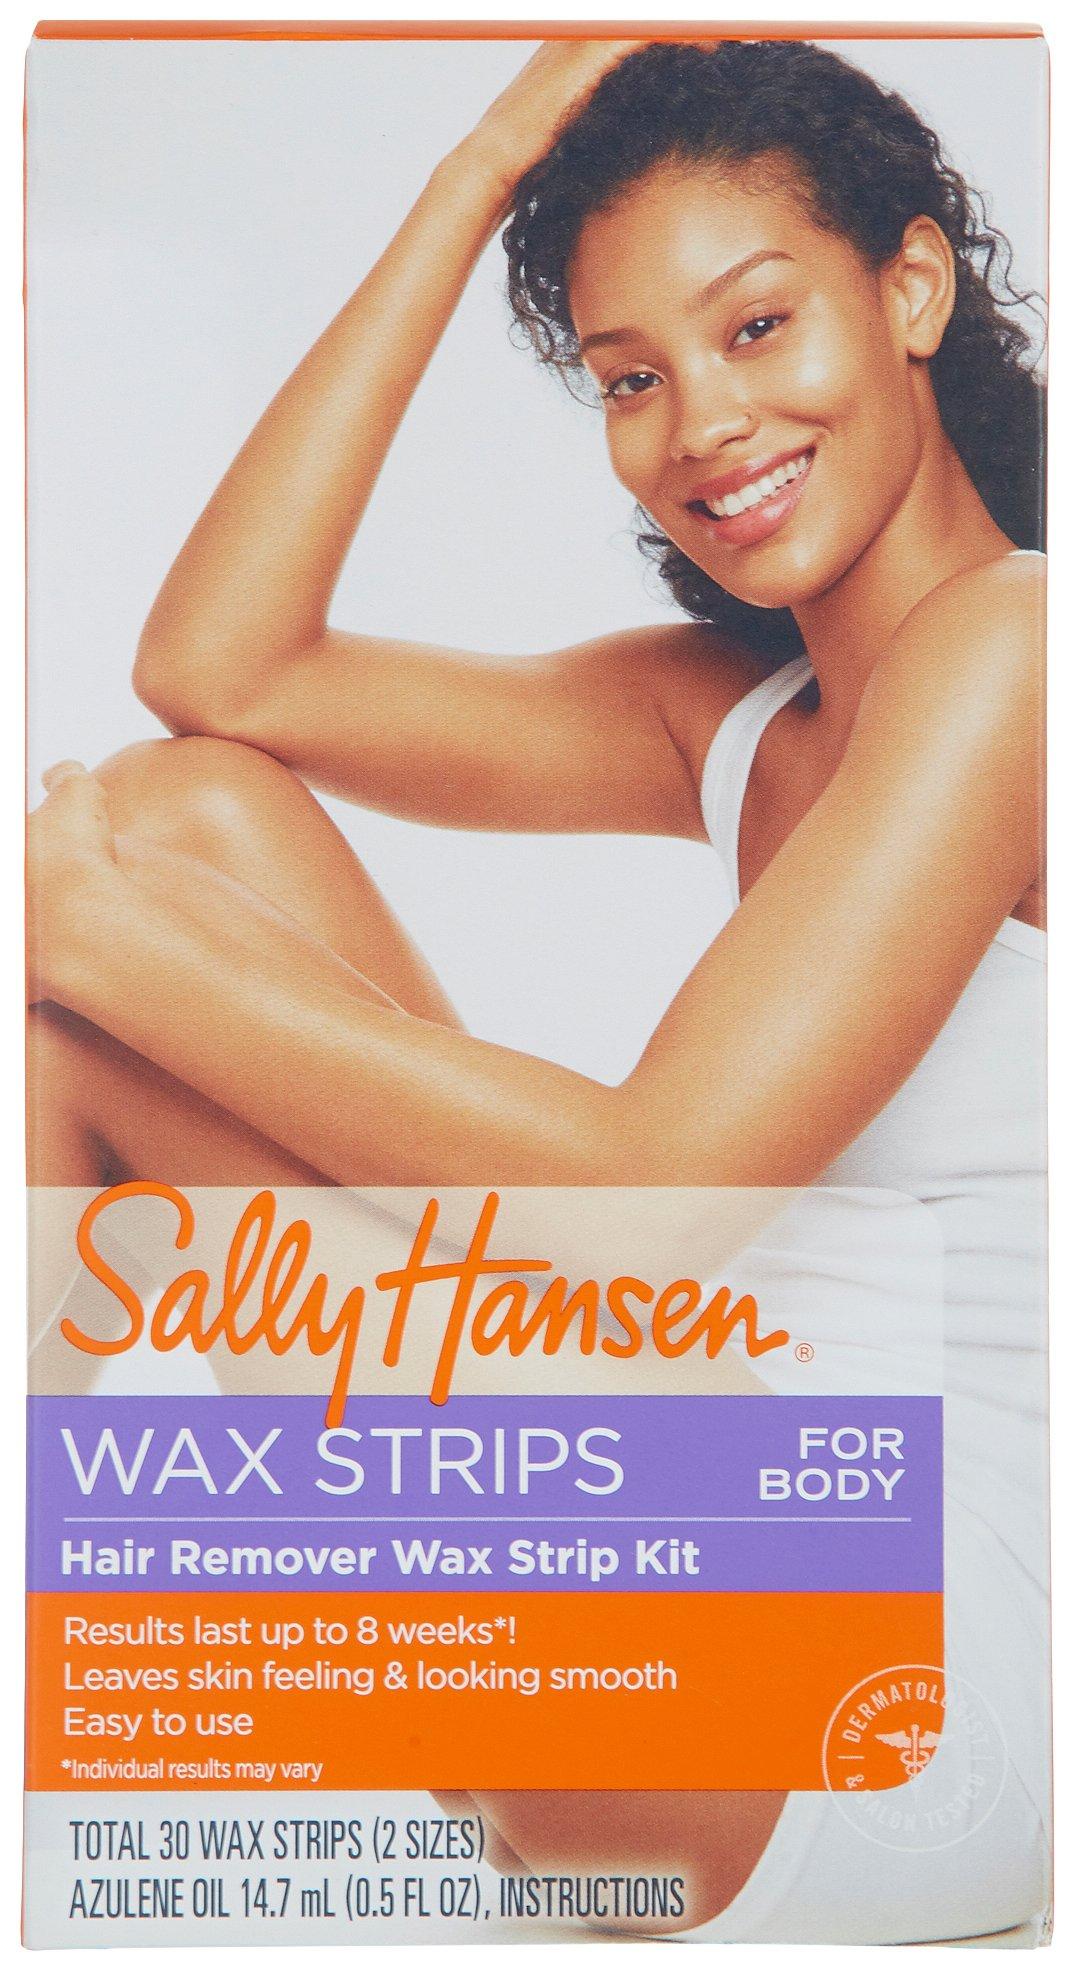 Sally Hansen Wax Strips Hair Removal Kit For